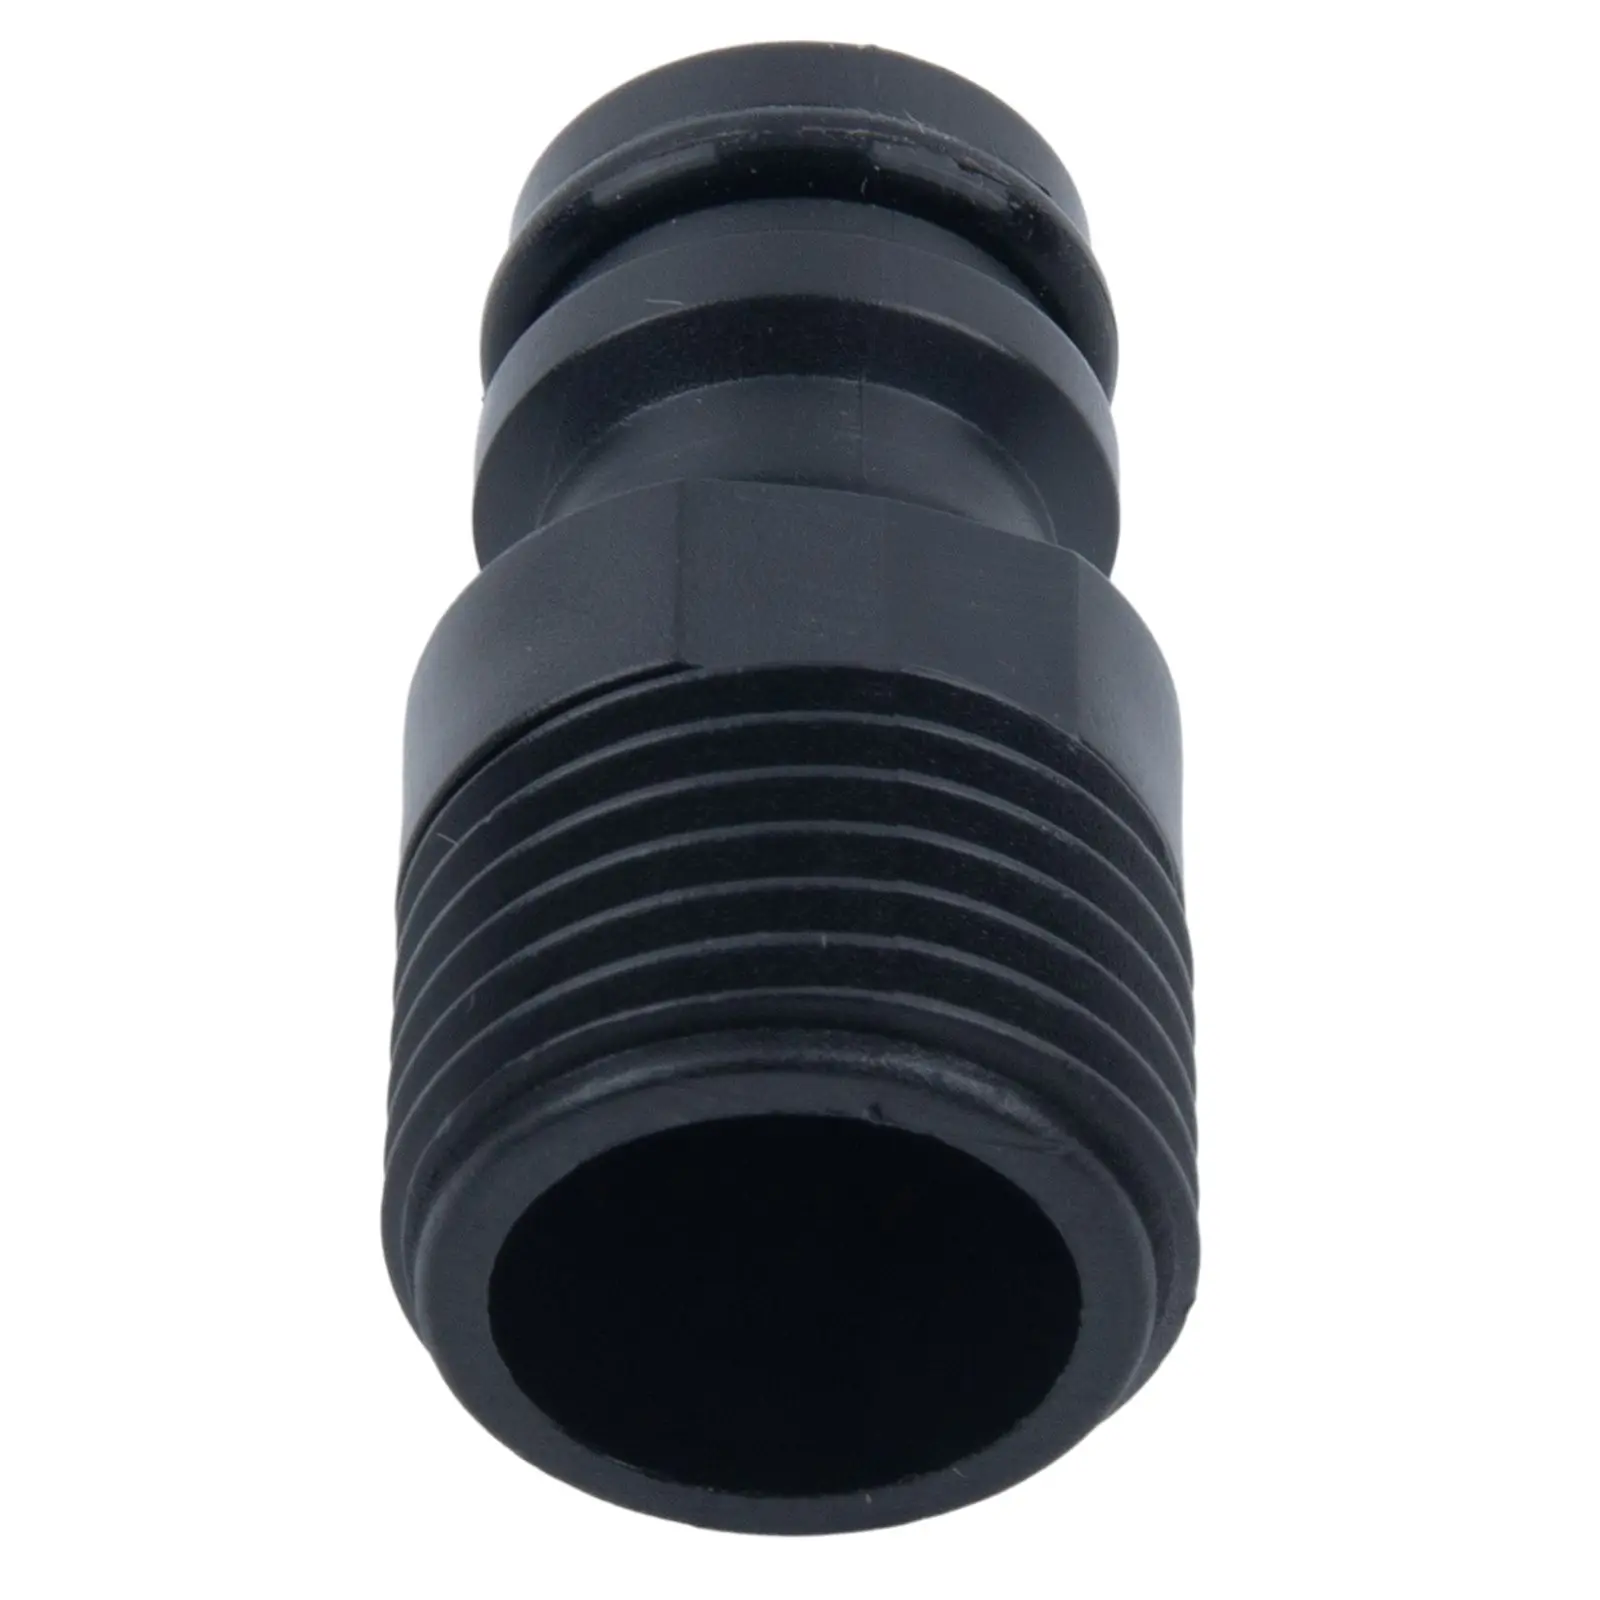 

Hot New Nipple Pipe Connector Tap Adaptor 1/2 Inch 2pcs BSP Outer Quick Coupler Threaded 4 Points Fitting Garden